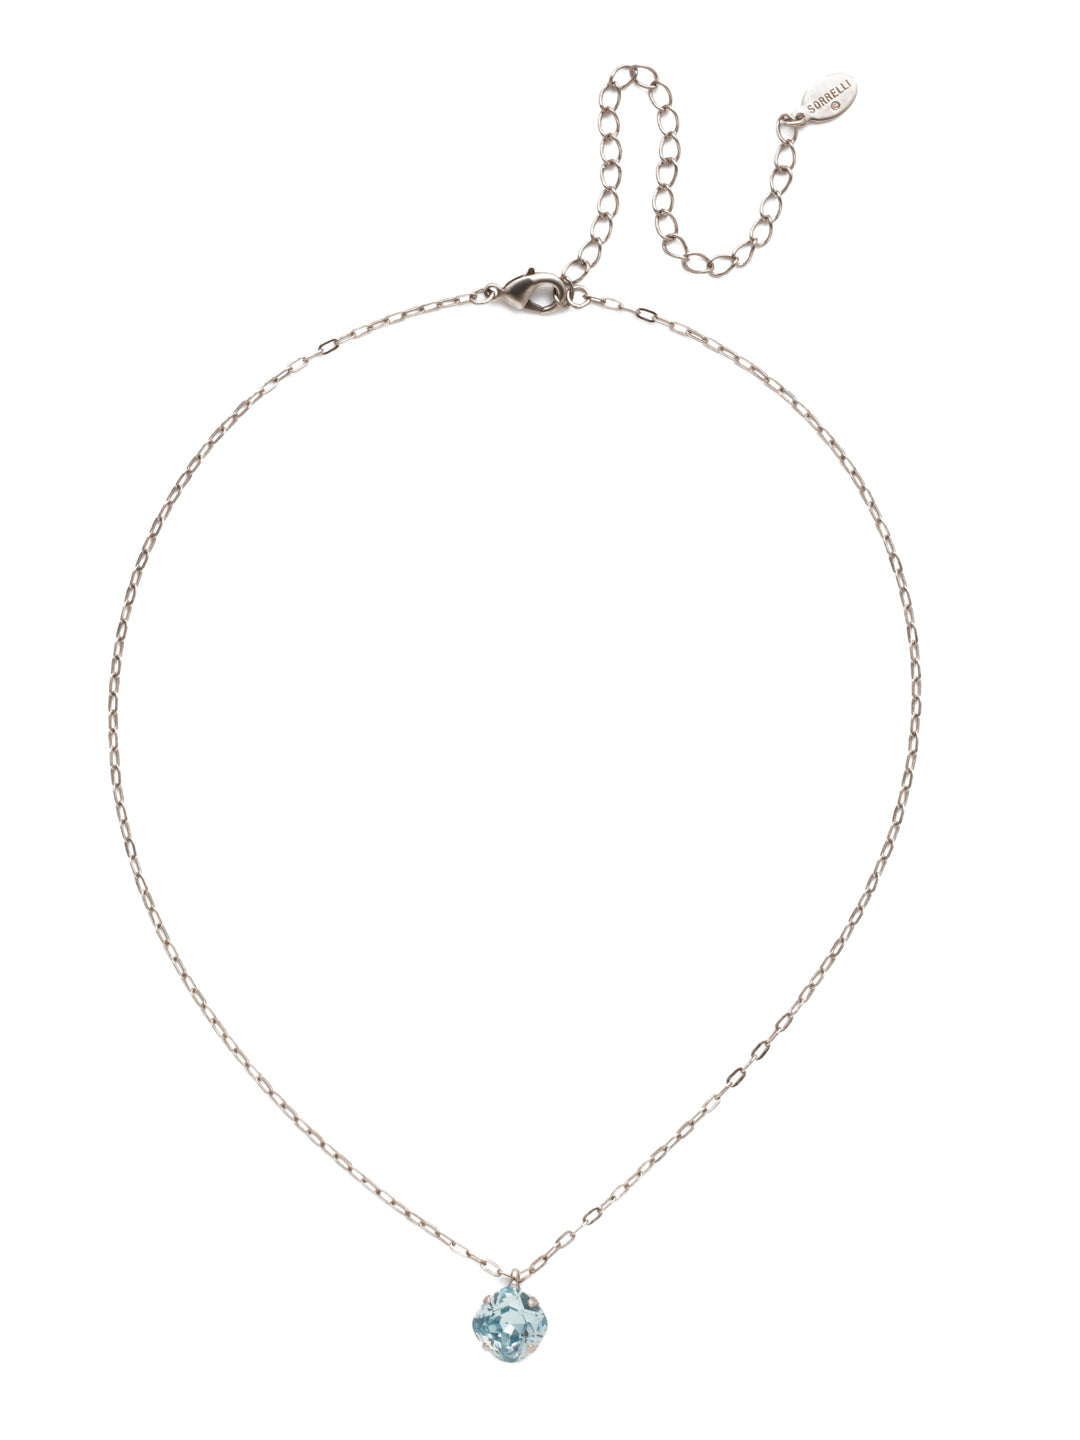 Siren Pendant Necklace - NEP22ASLAQ - With a cushion-cut crystal and delicate chain, the Siren Pendant  will add a litle sparkle to your everyday look. From Sorrelli's Light Aqua collection in our Antique Silver-tone finish.